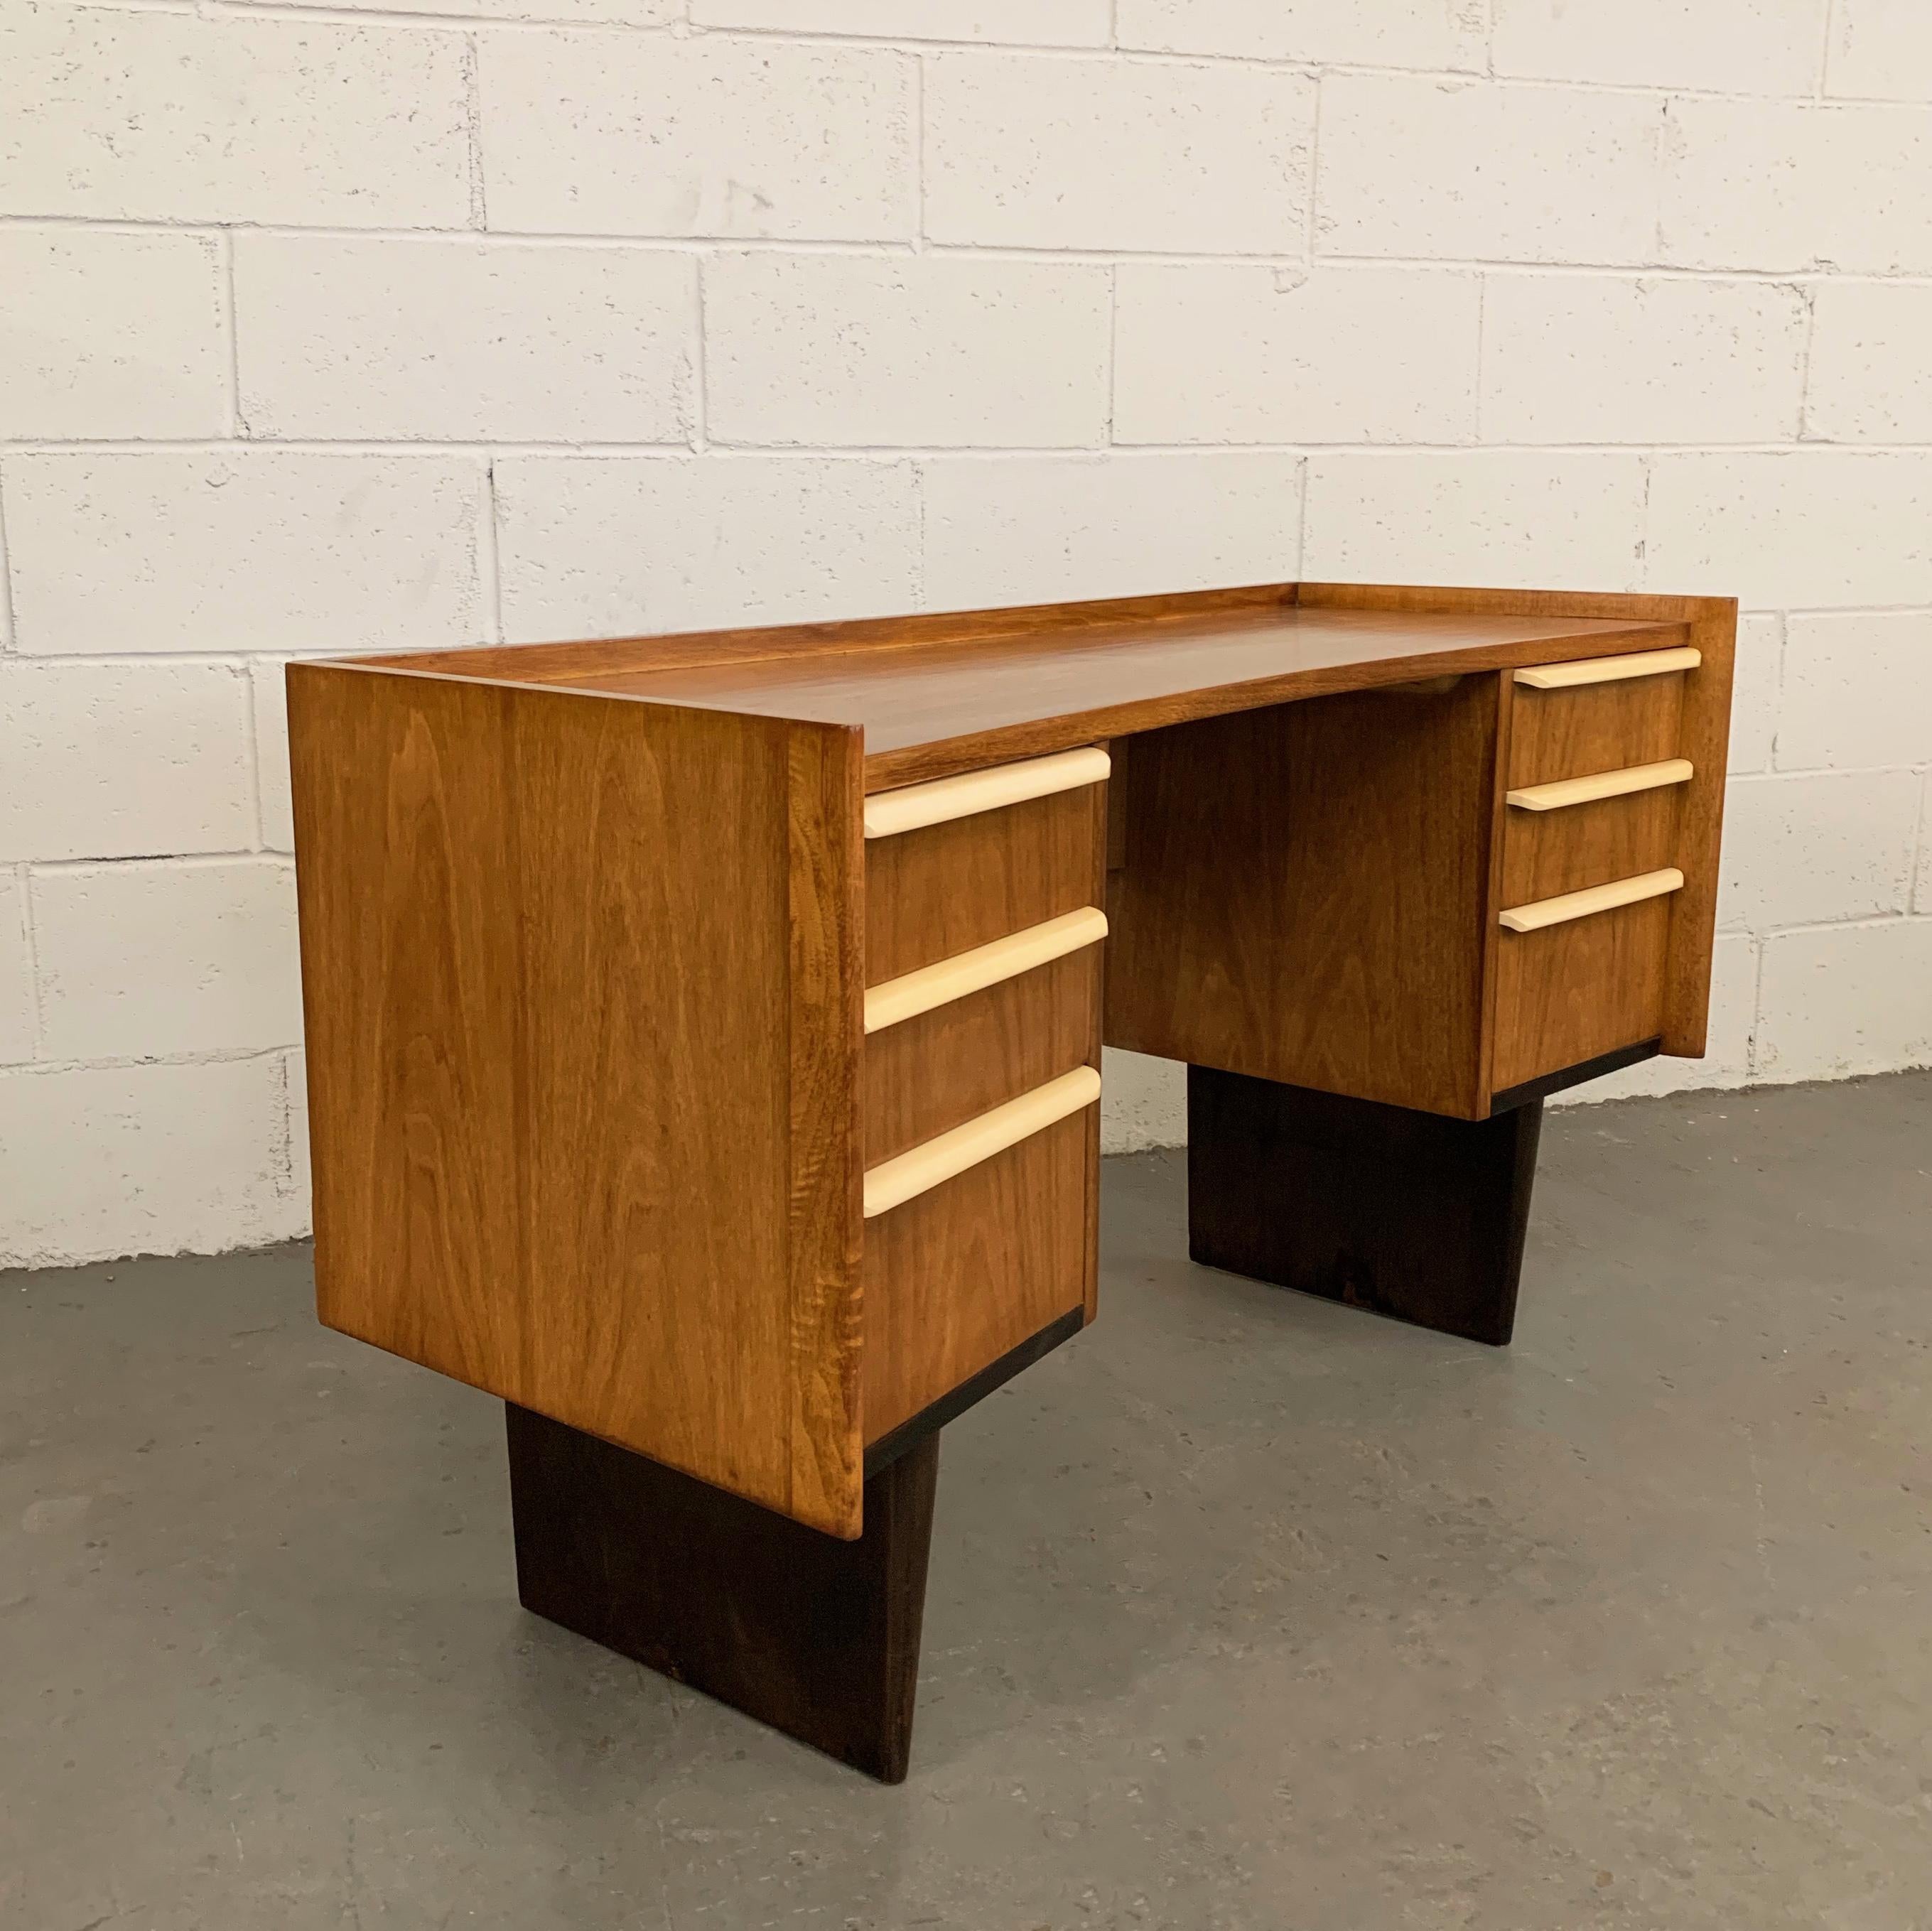 Mid-Century Modern, double pedestal, tri-tone, vanity writing desk by Edward Wormley for Dunbar features a medium mahogany body sitting on slender, ebonized bases with lacquered beige drawer handles. The height of the desk surface is 25.25 inches